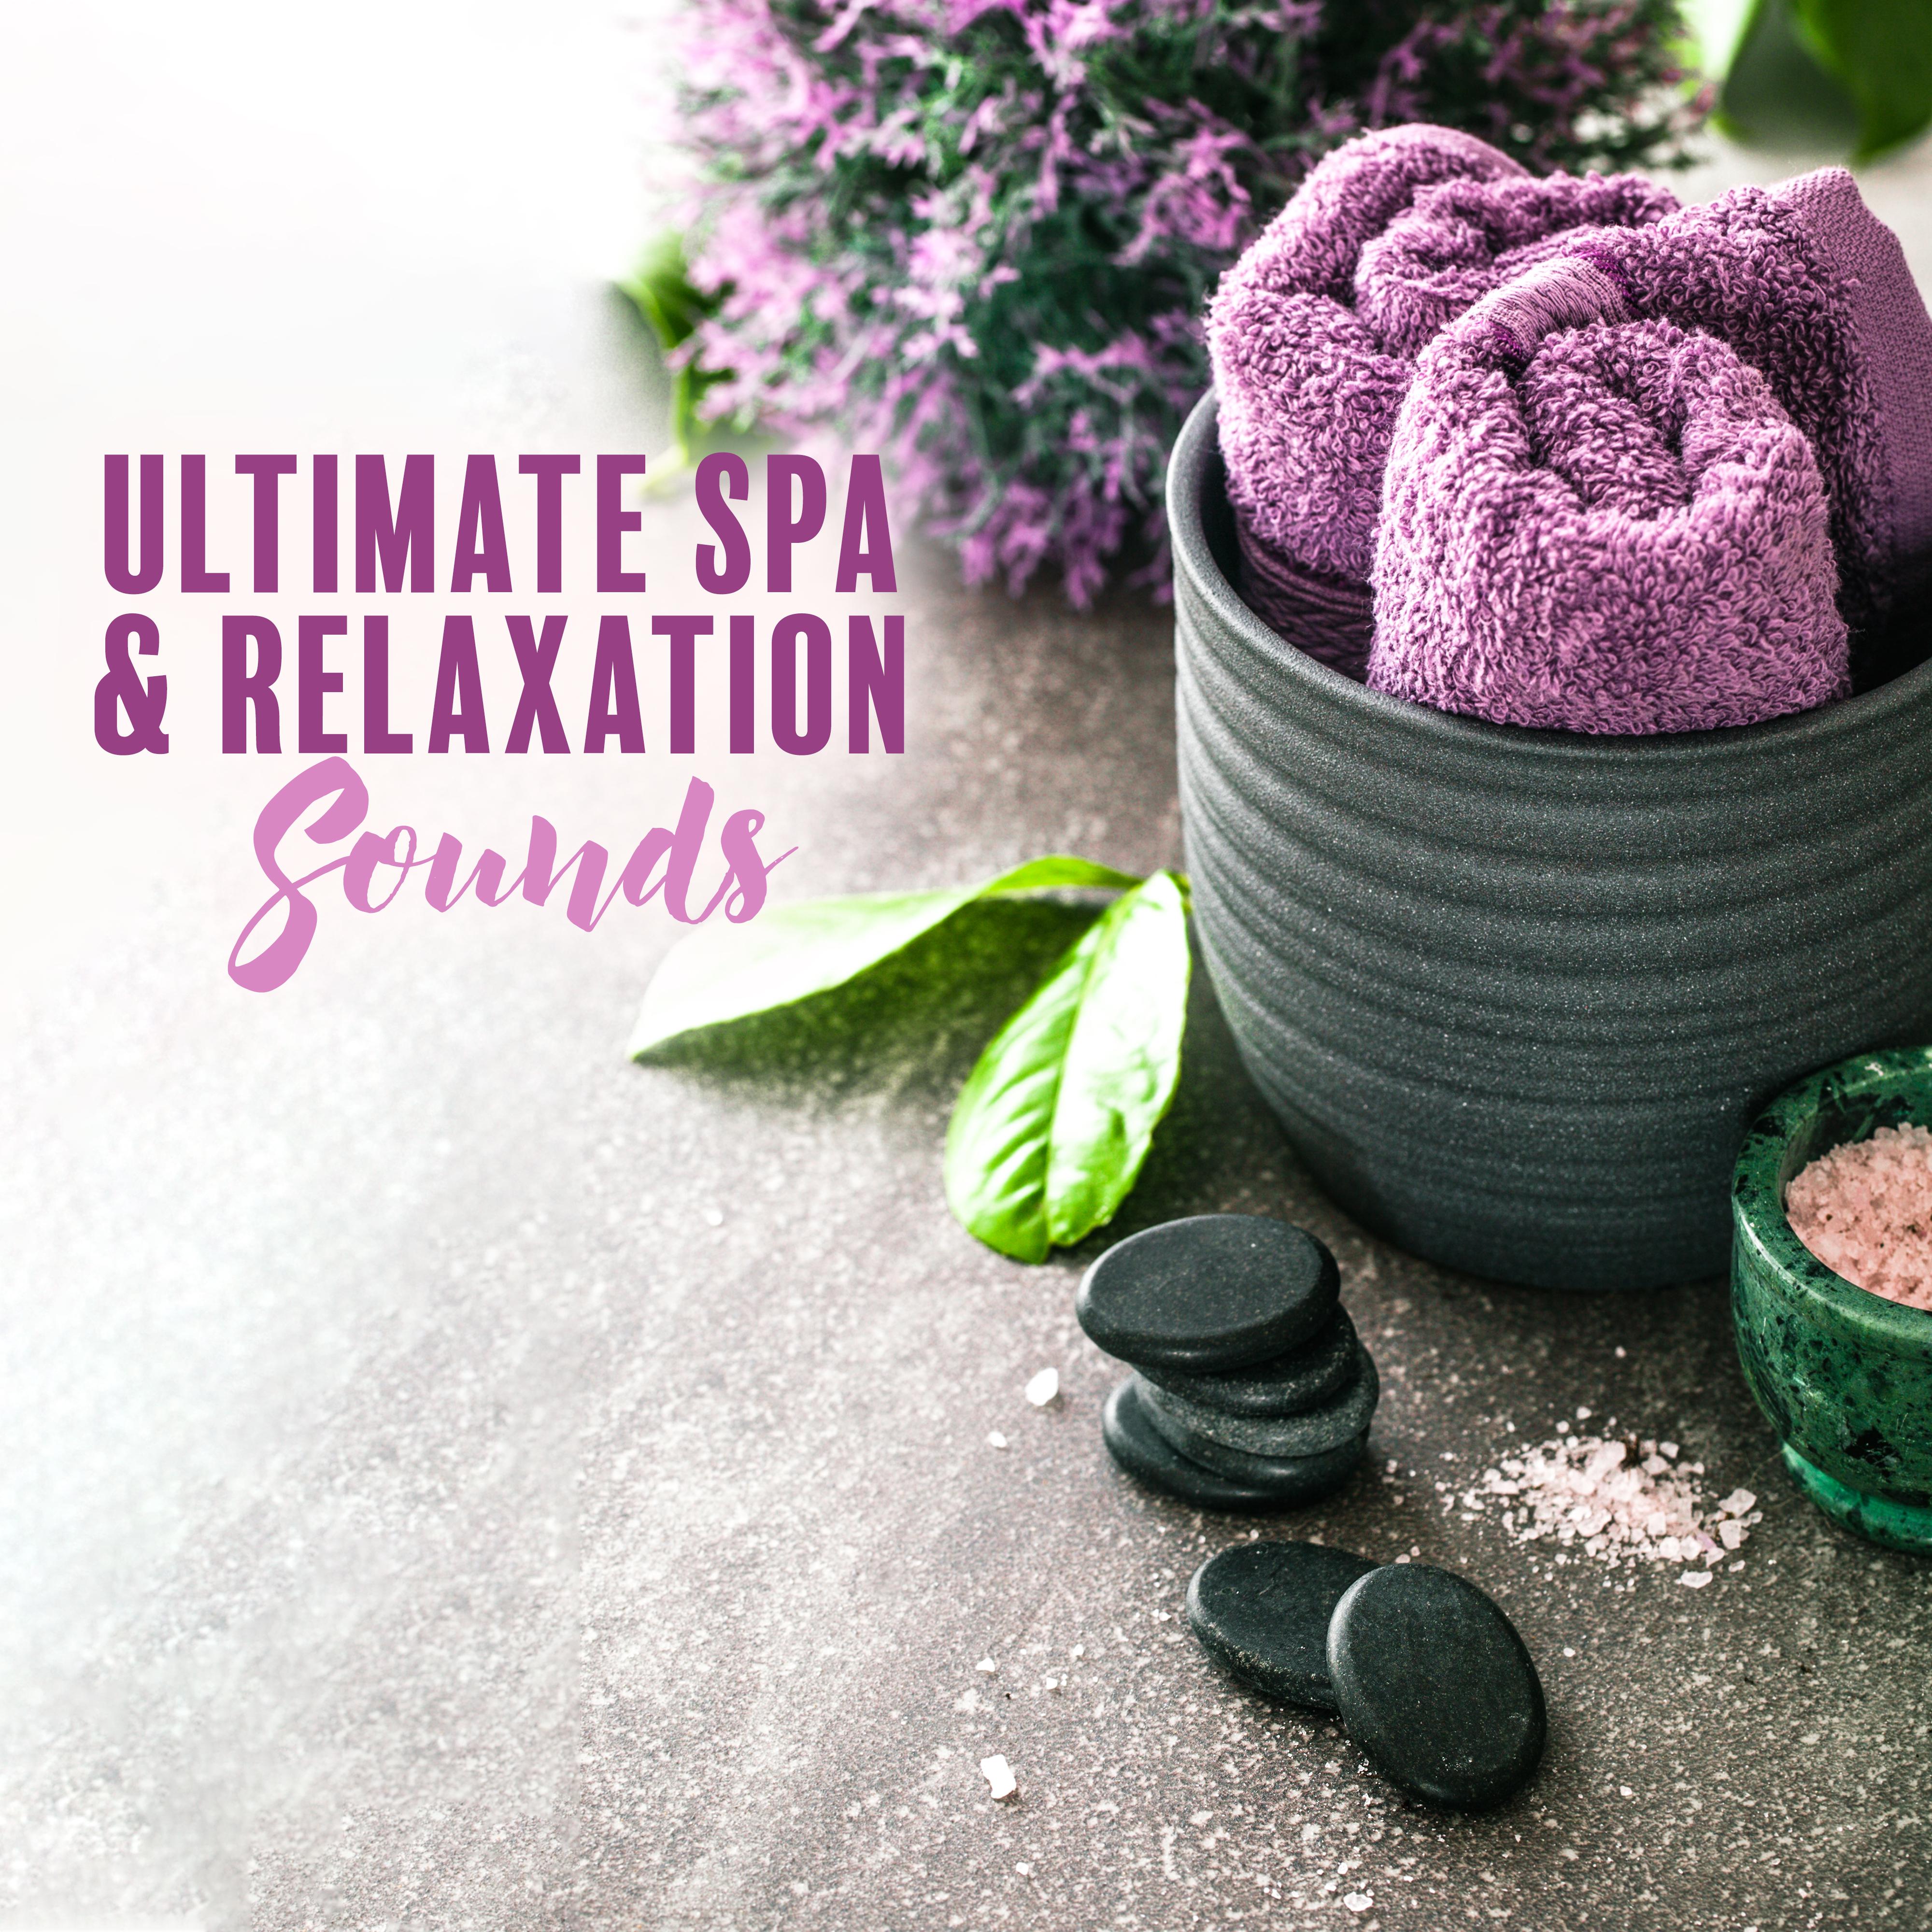 Ultimate Spa & Relaxation Sounds – New Age Music Compilation